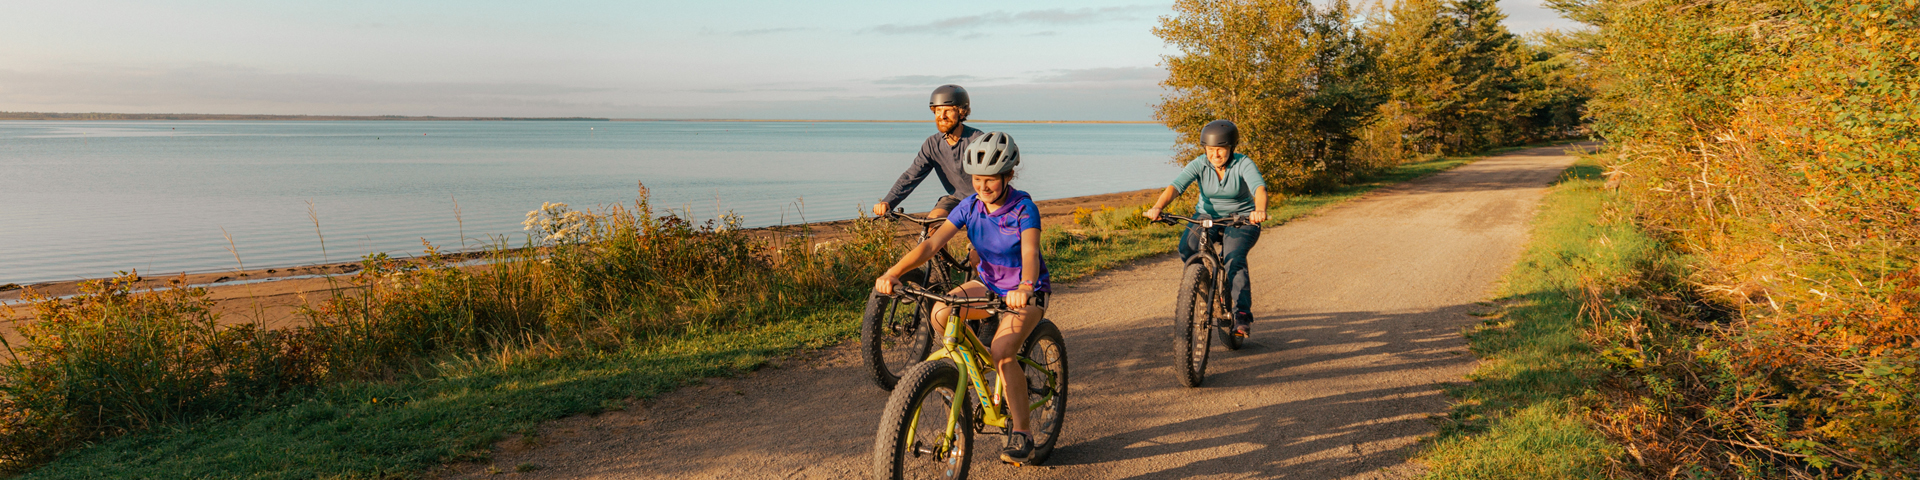 A family cycling on a trail near a body of water